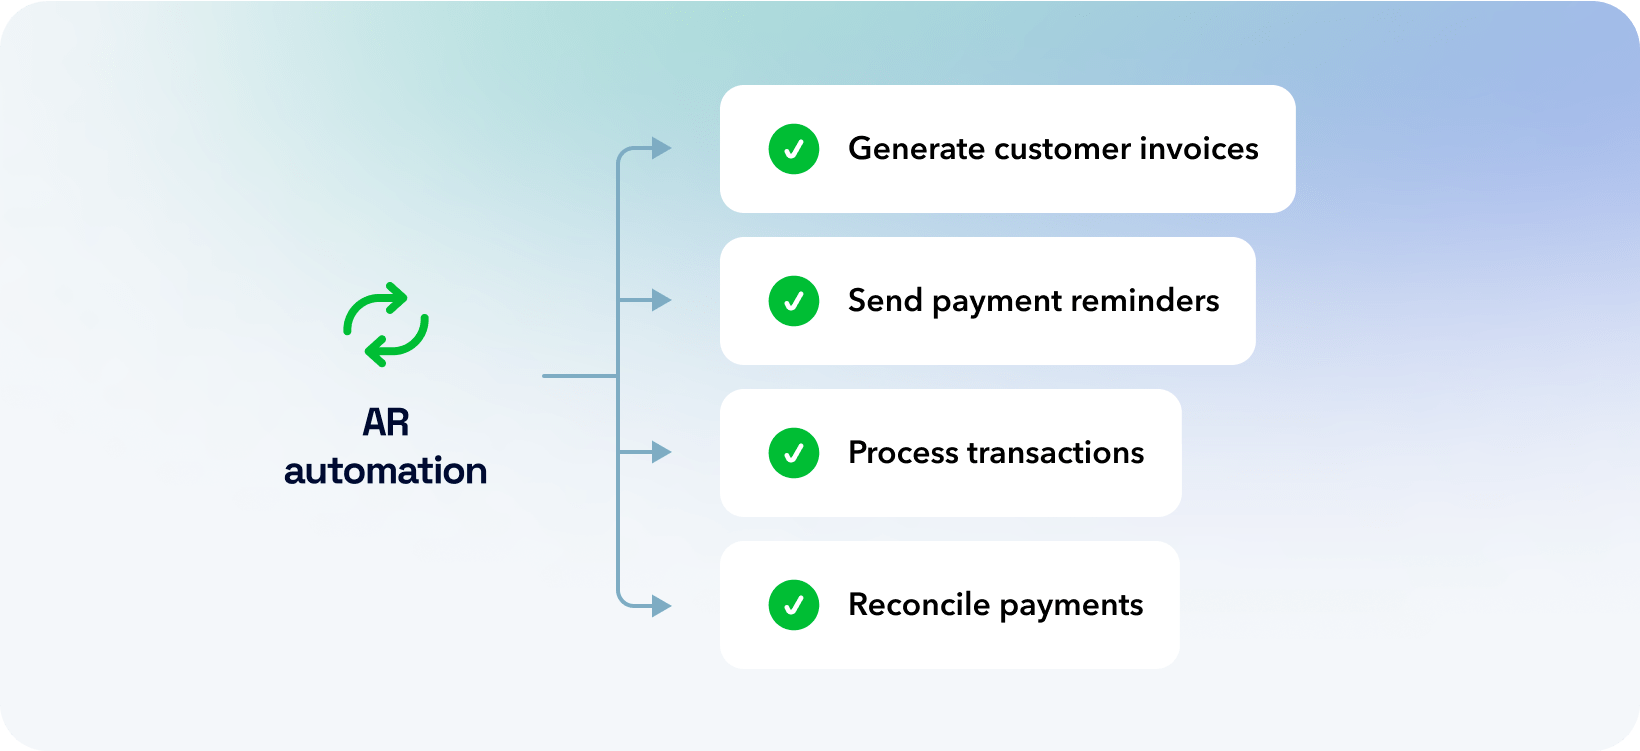 AR automation generates customer invoices, sends payment reminders, processes transaction, and reconciles payments